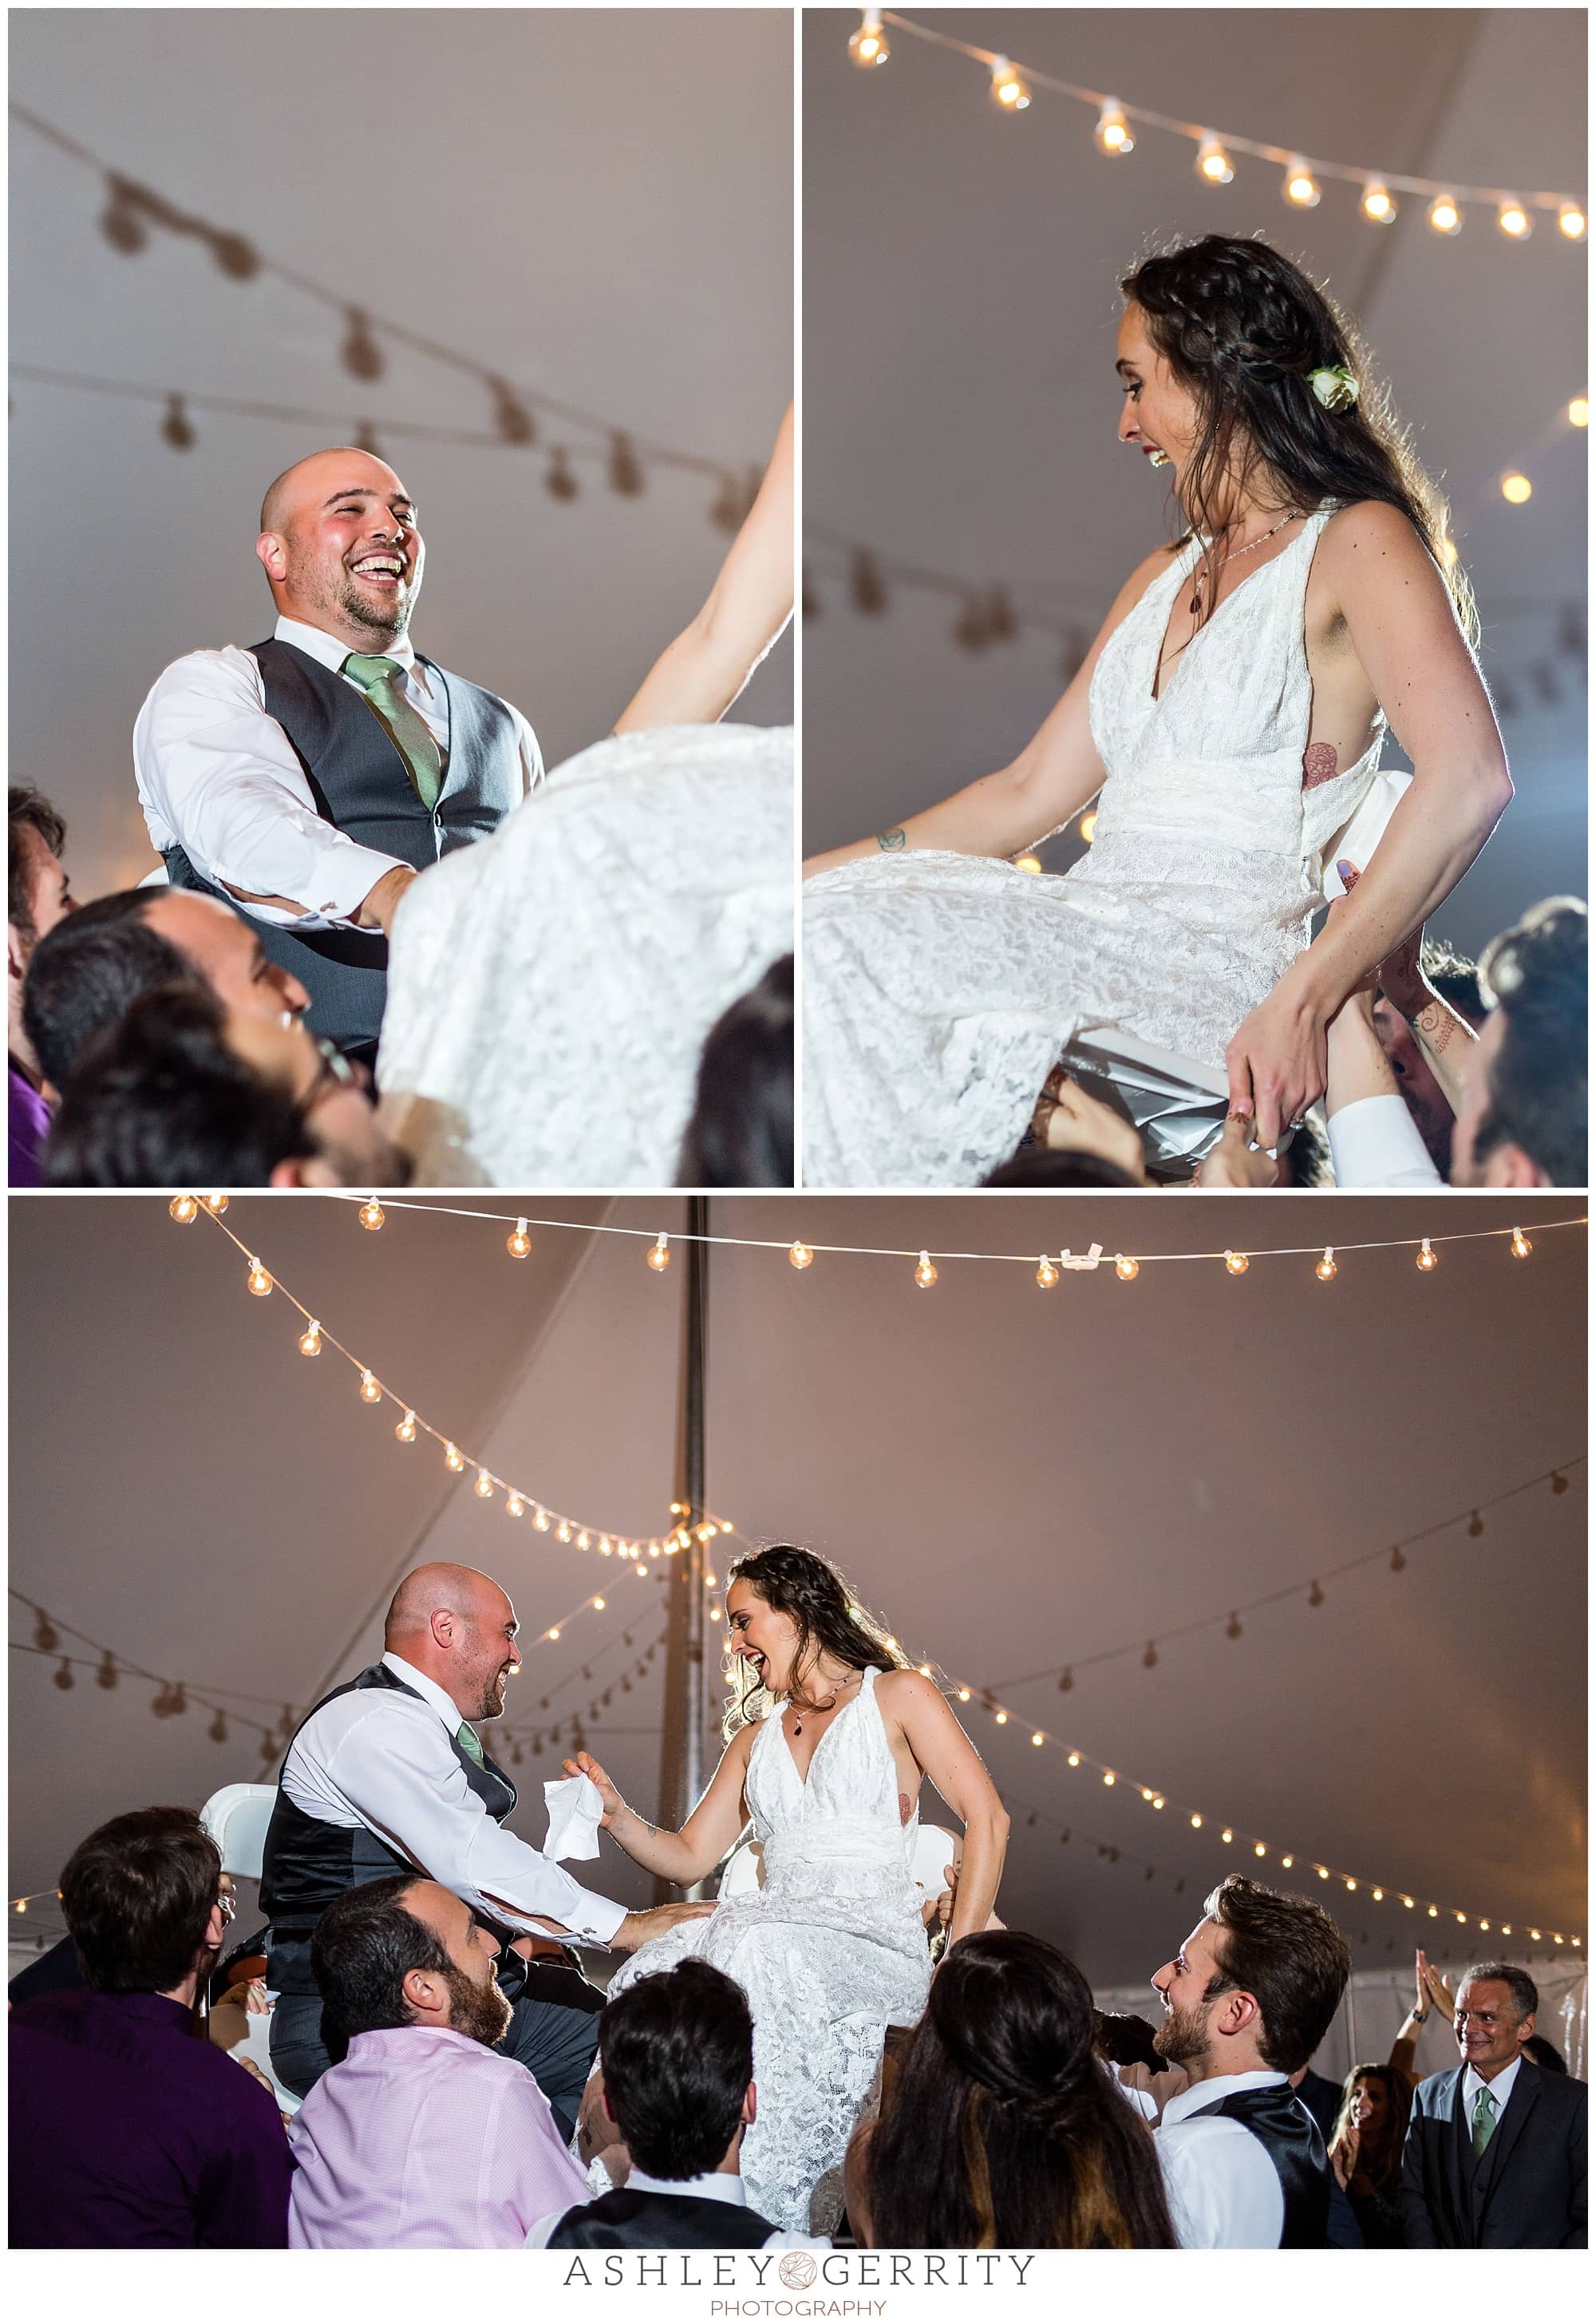 During a hora, bride & groom are lifted up in chairs as guests surround them and dance.